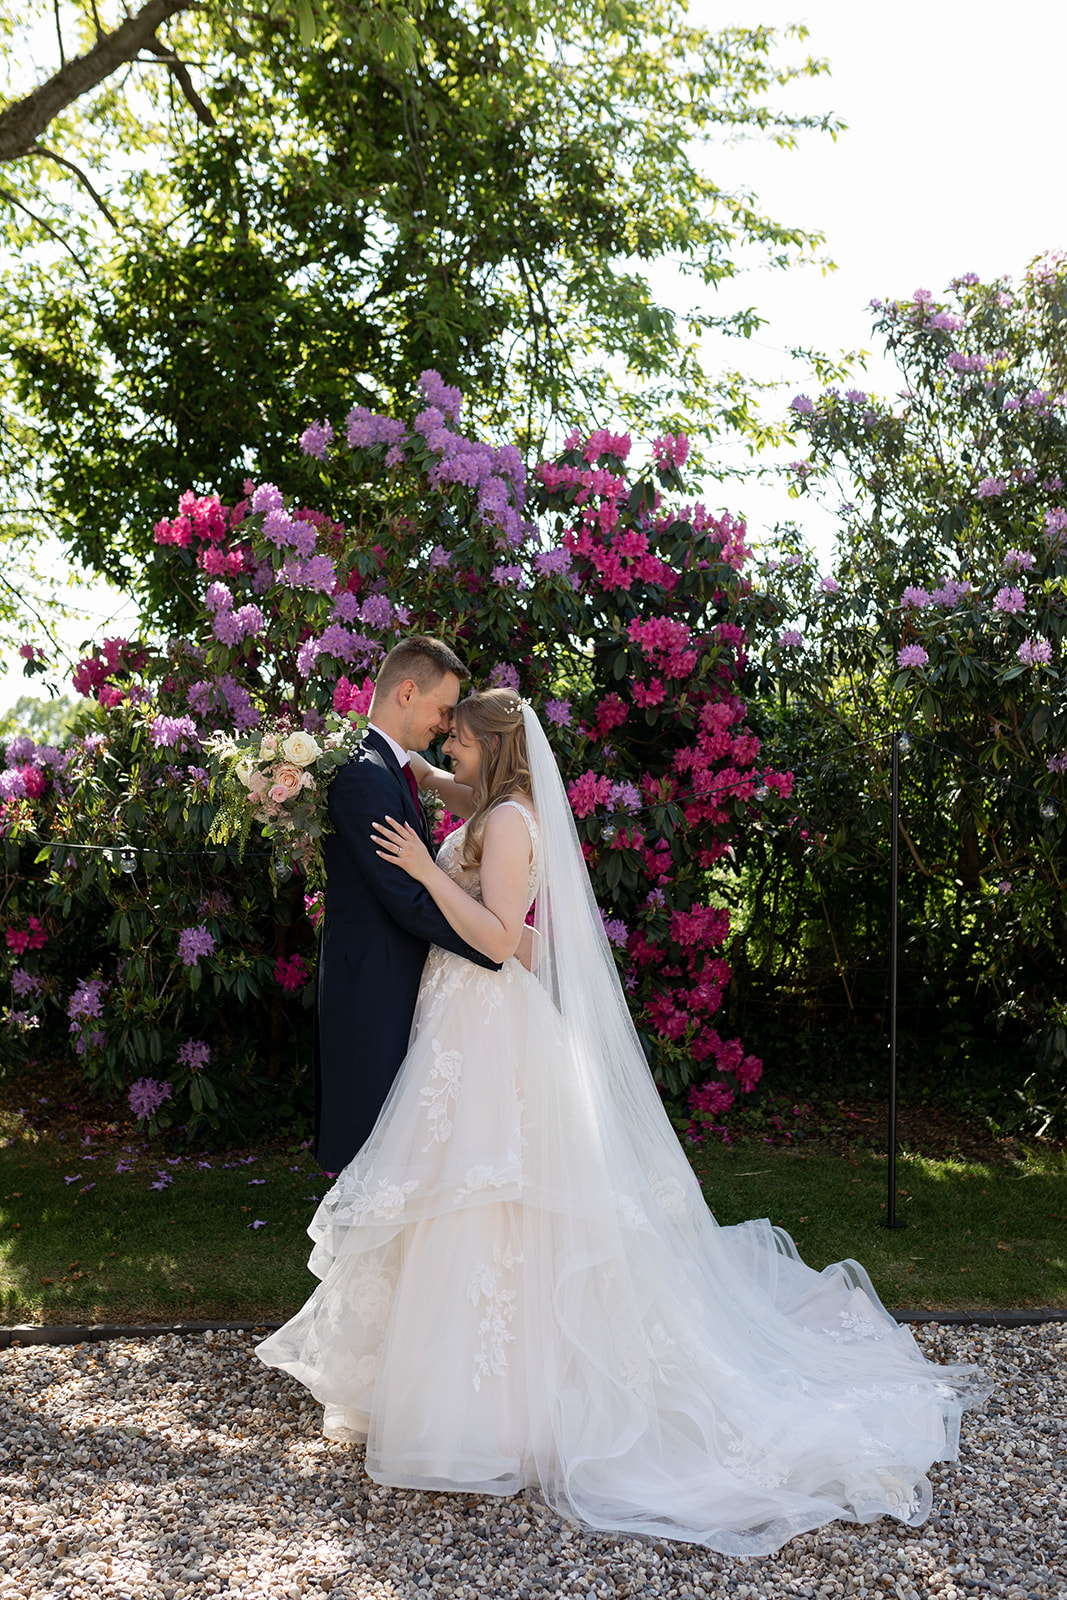 Couple on wedding day in front of colourful flowers